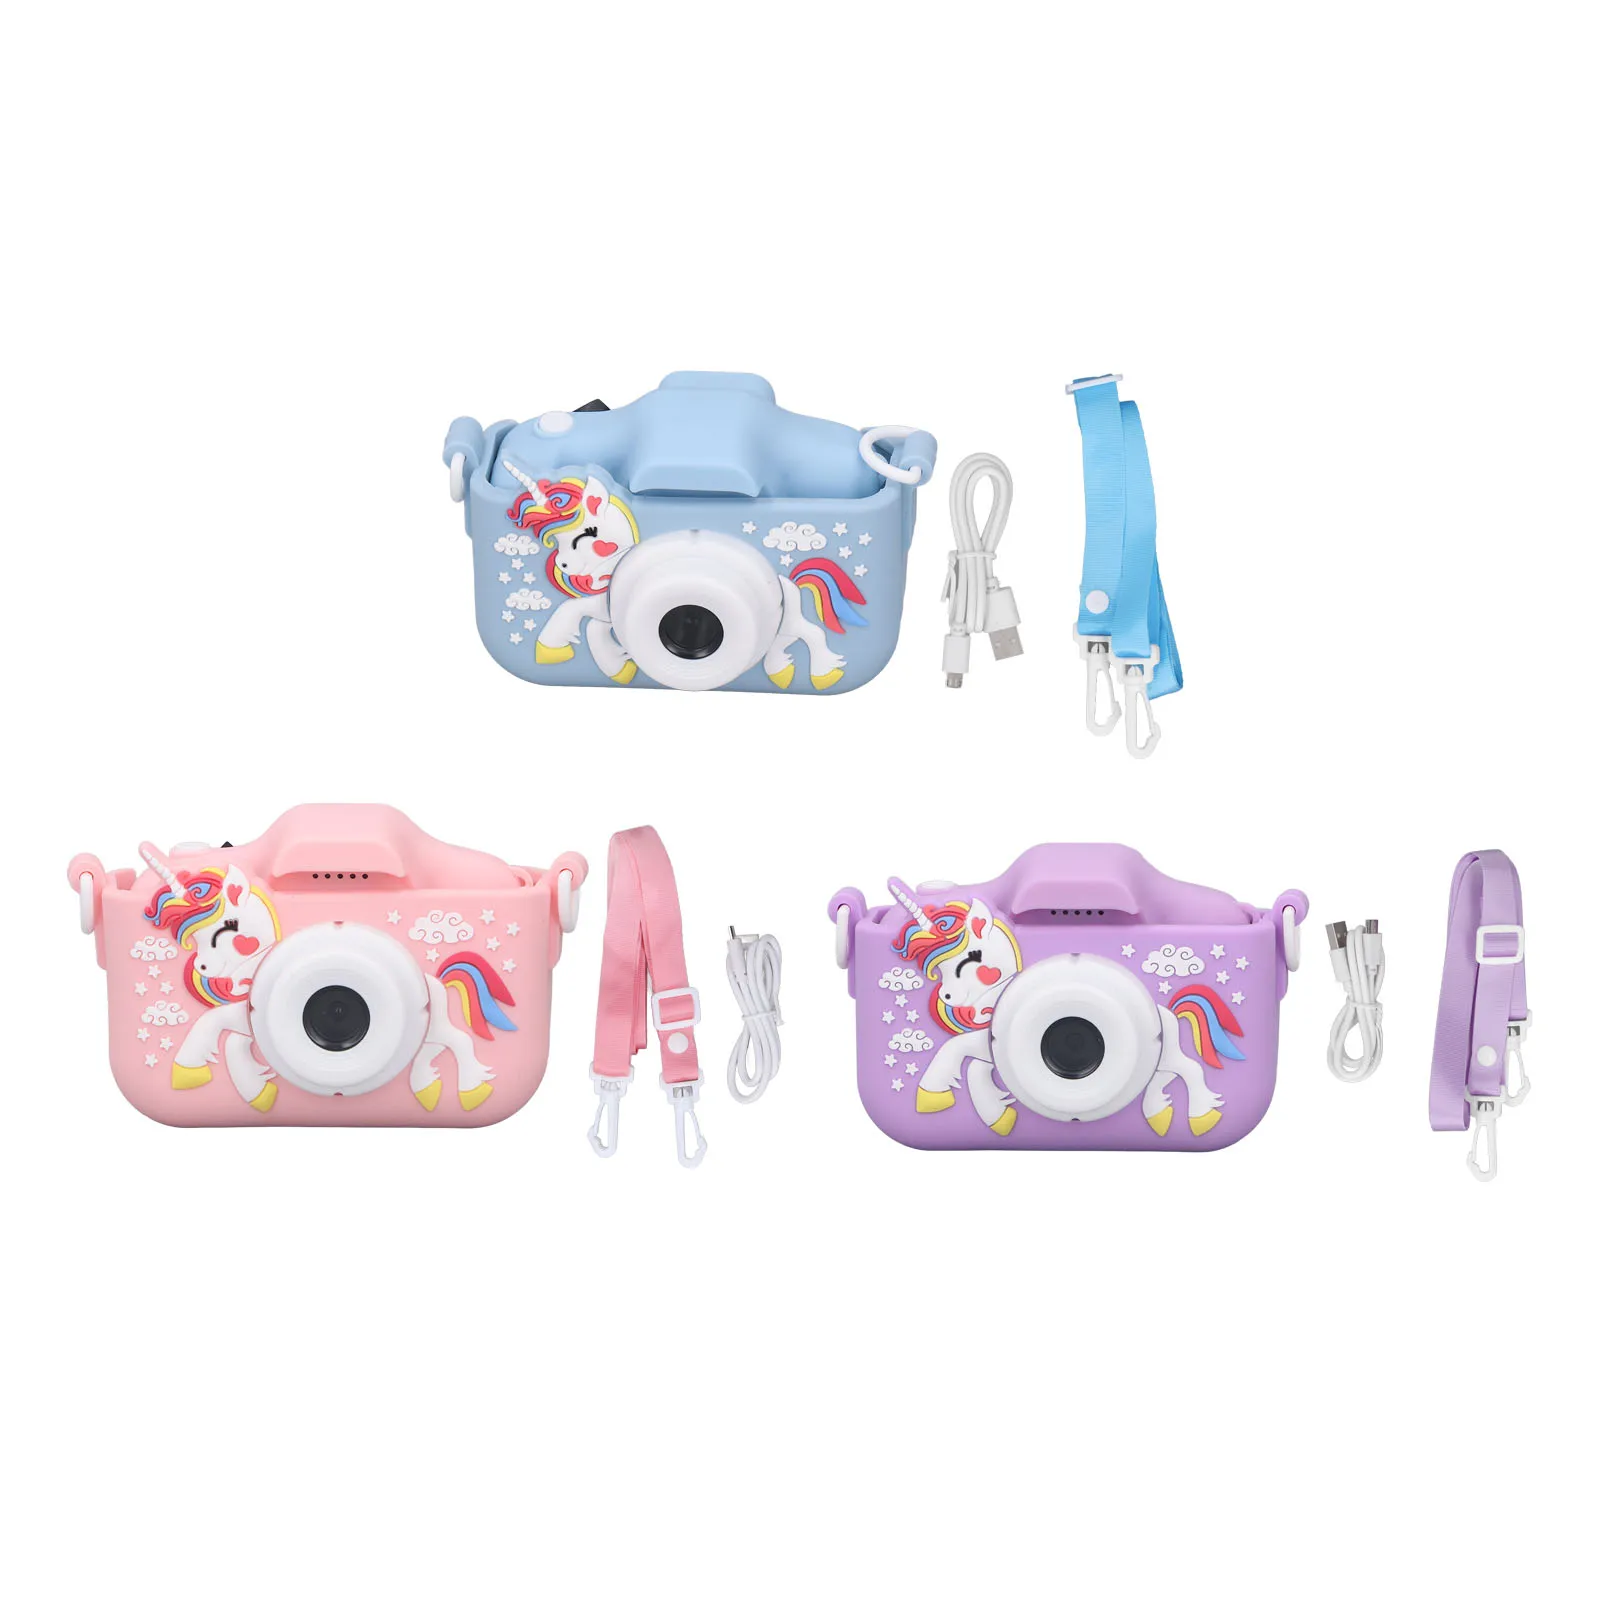 Kids Camera Toys Digital Photo Video Recording Camcorder Cute Cartoon Patterned - £22.72 GBP